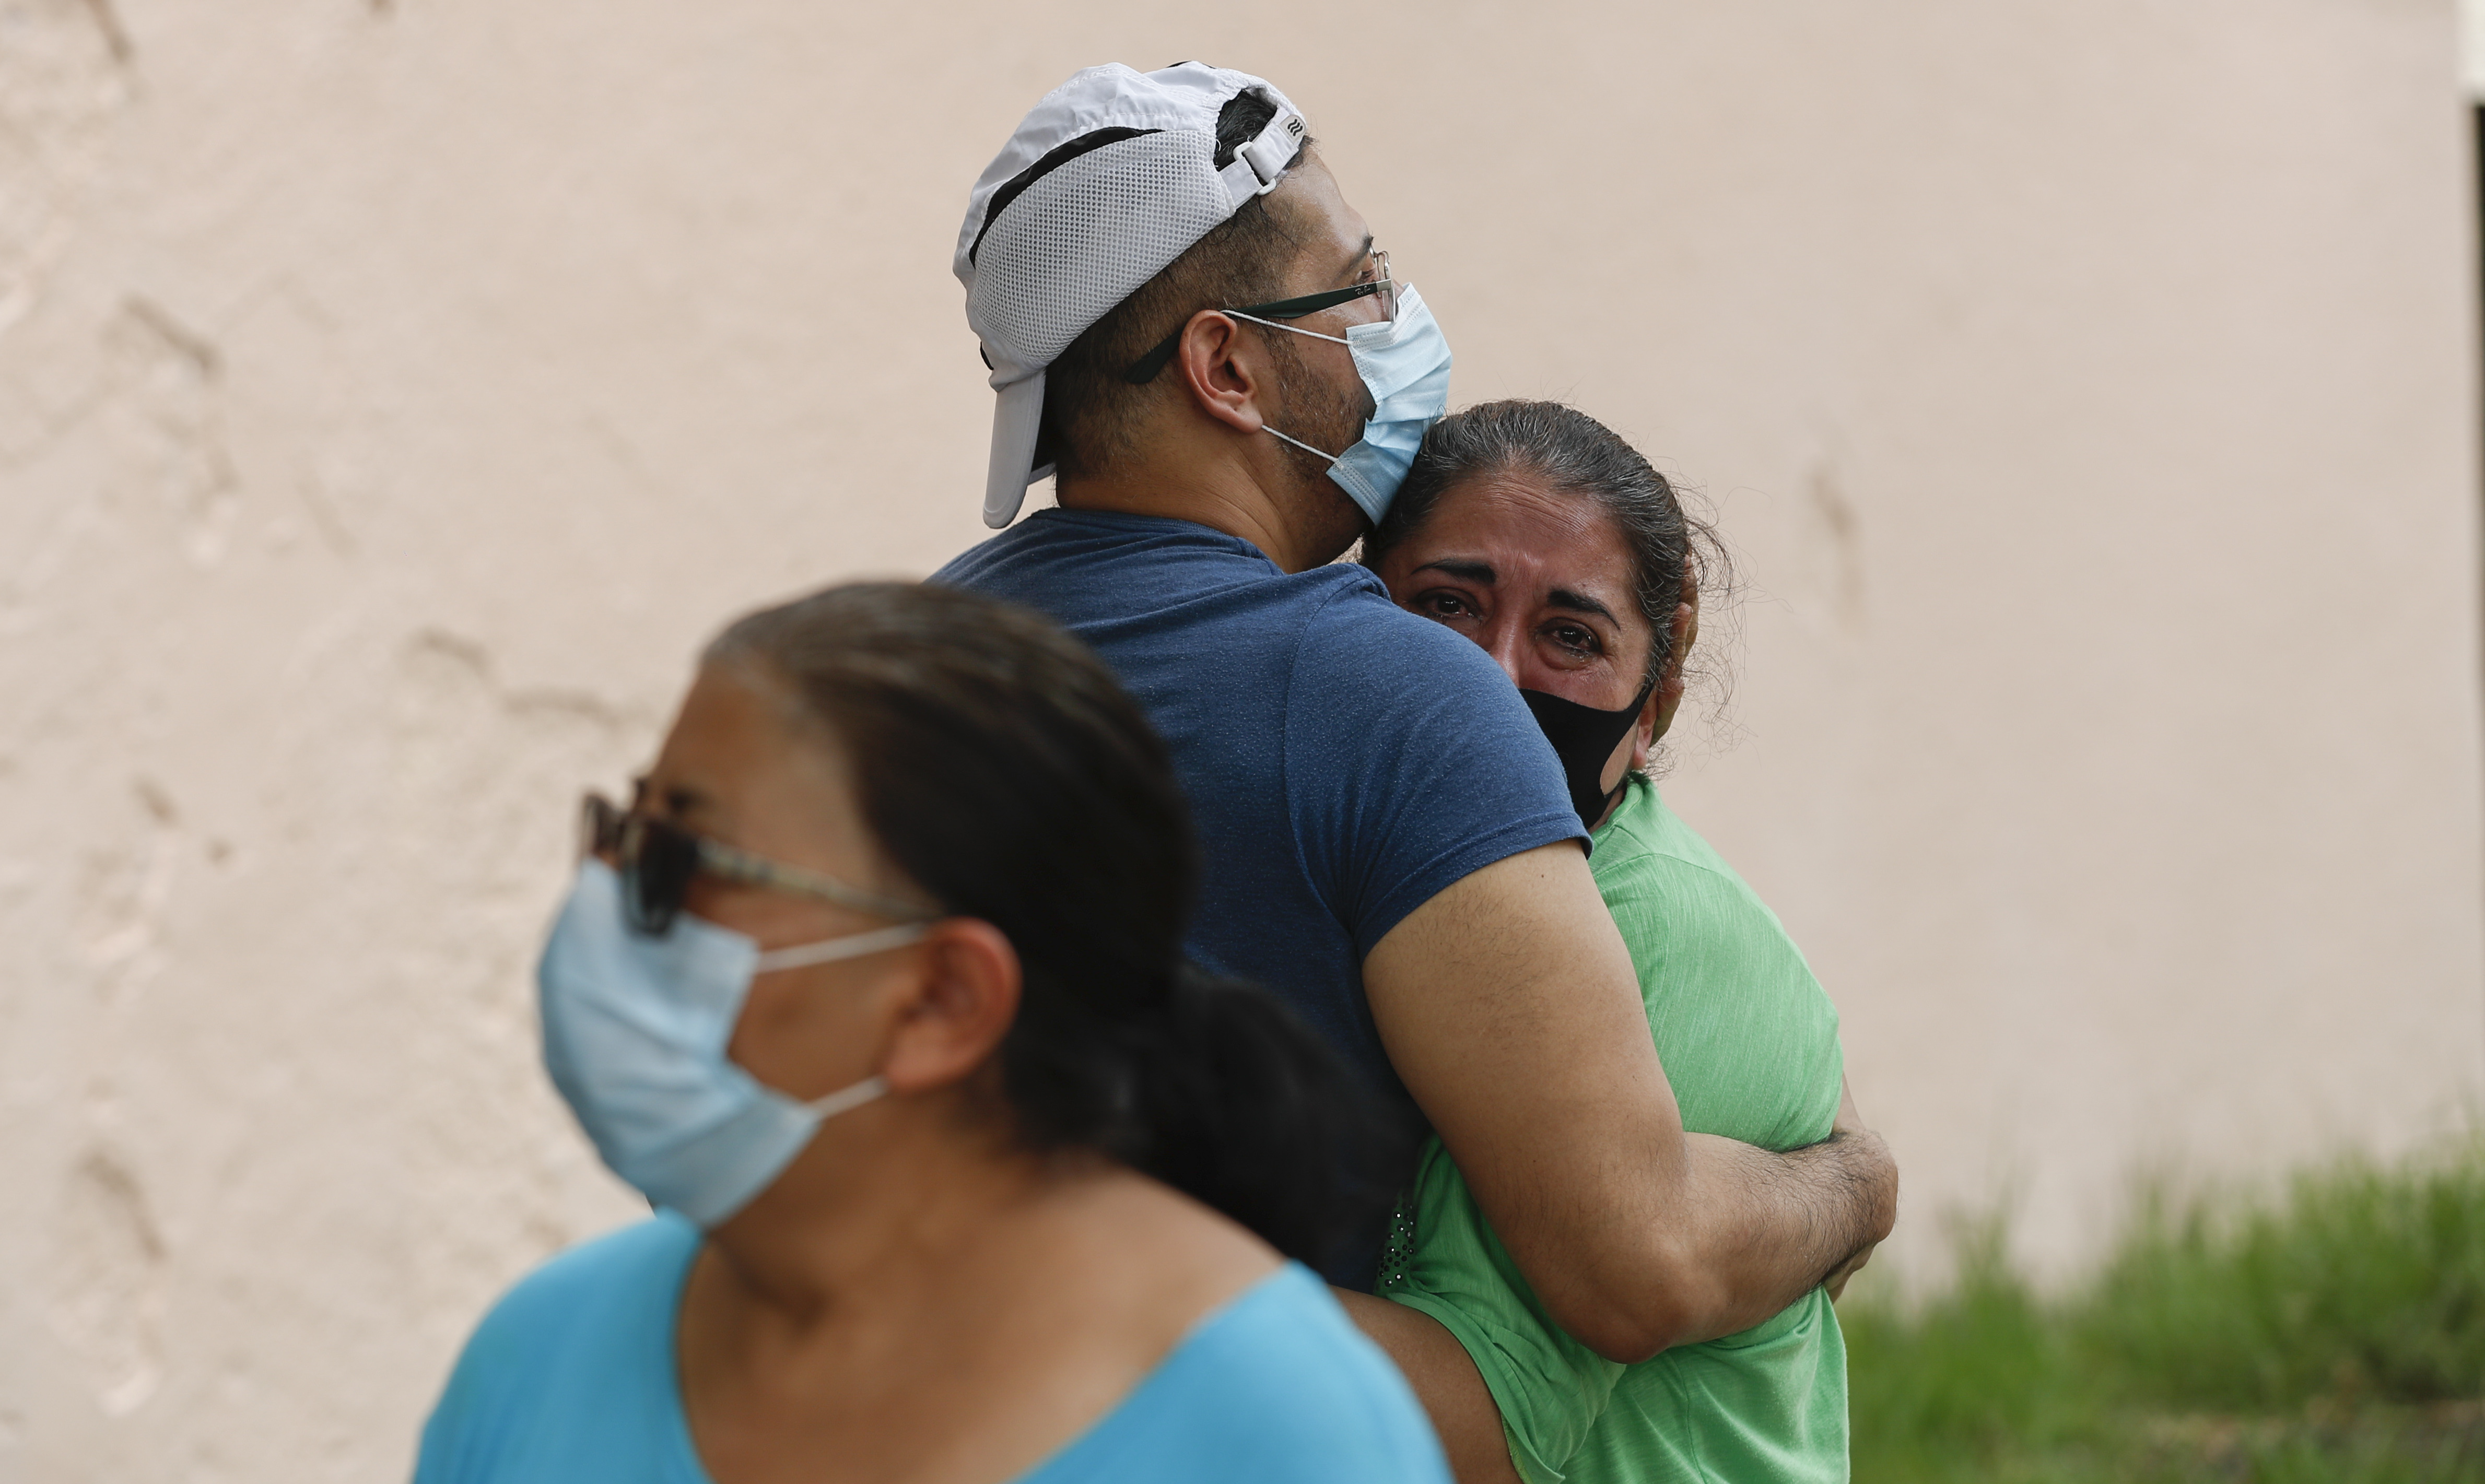 A couple embraces outside their home as they wait for the all-clear to return to their apartment, after an earthquake in Mexico City, Tuesday, June 23, 2020. The earthquake struck near the Huatulco resort in southern Mexico on Tuesday morning, swayed buildings in Mexico City and sent thousands fleeing into the streets. (AP Photo/Eduardo Verdugo)